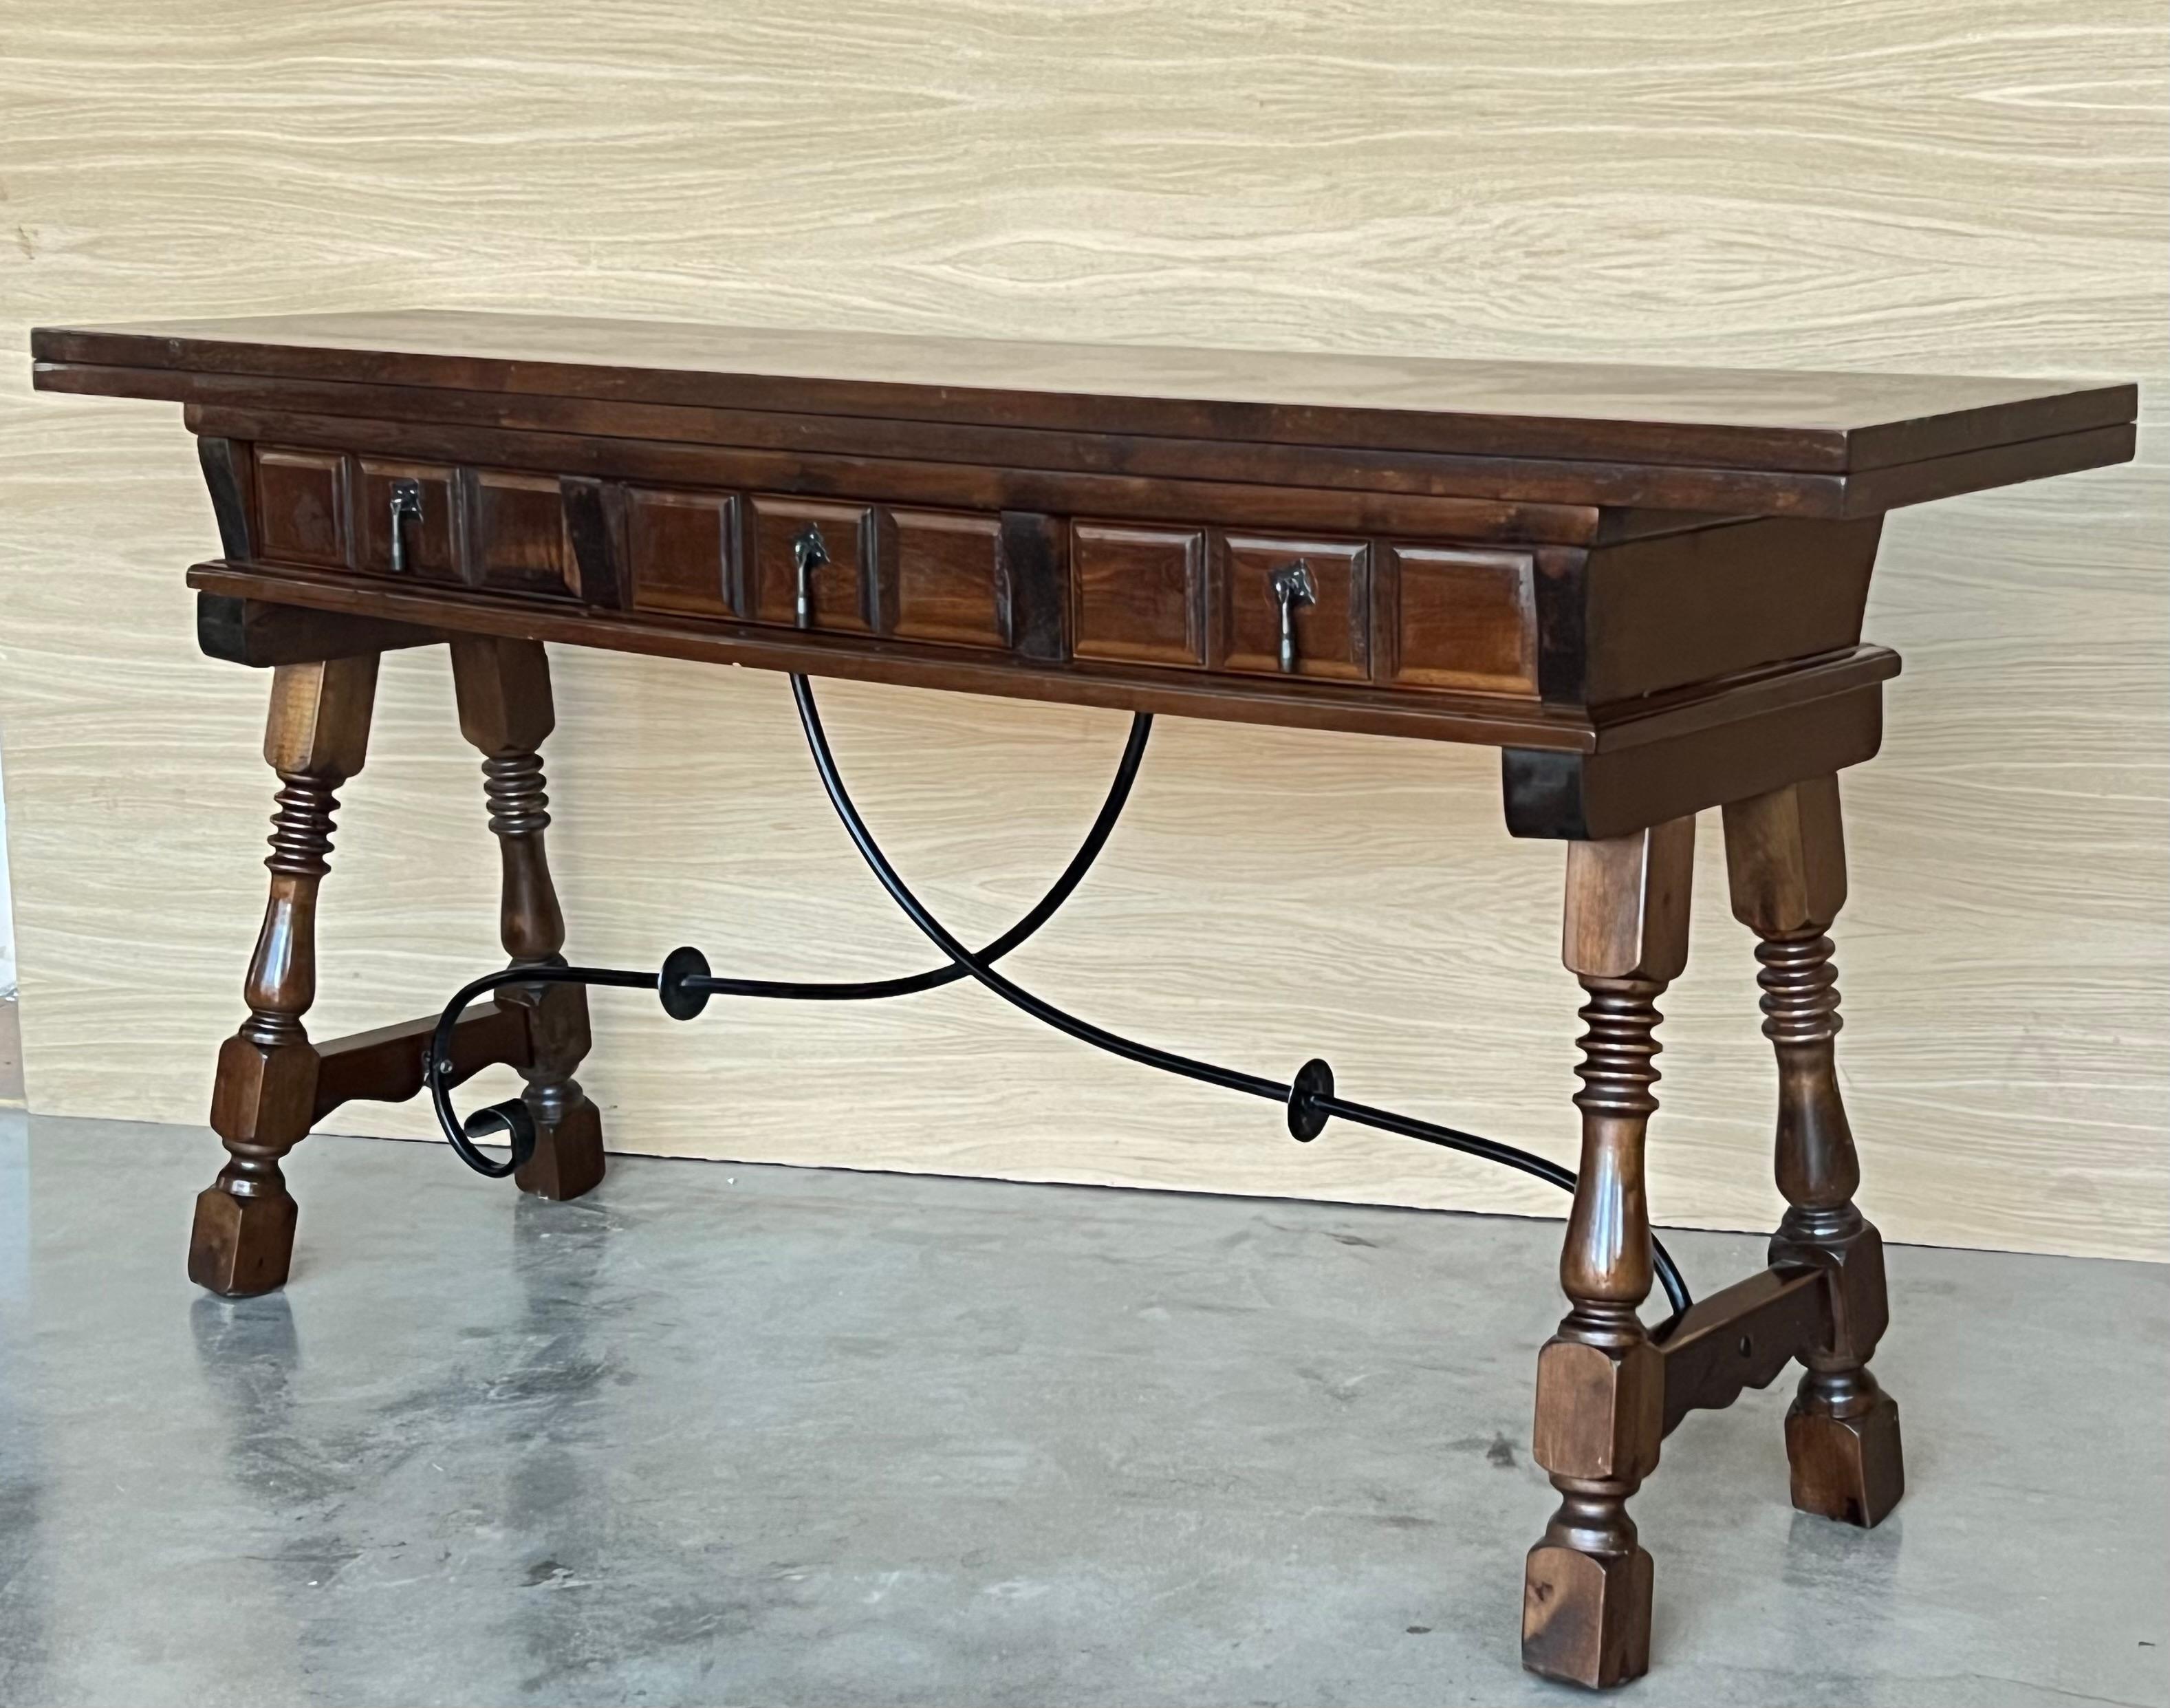 Early 20th century Spanish console fold out table with iron stretcher & three drawers.
A beautiful early 20th century Spanish console fold out farm table.
Works as both a dining table and console.
This Console is perfect to decorate our entrance to